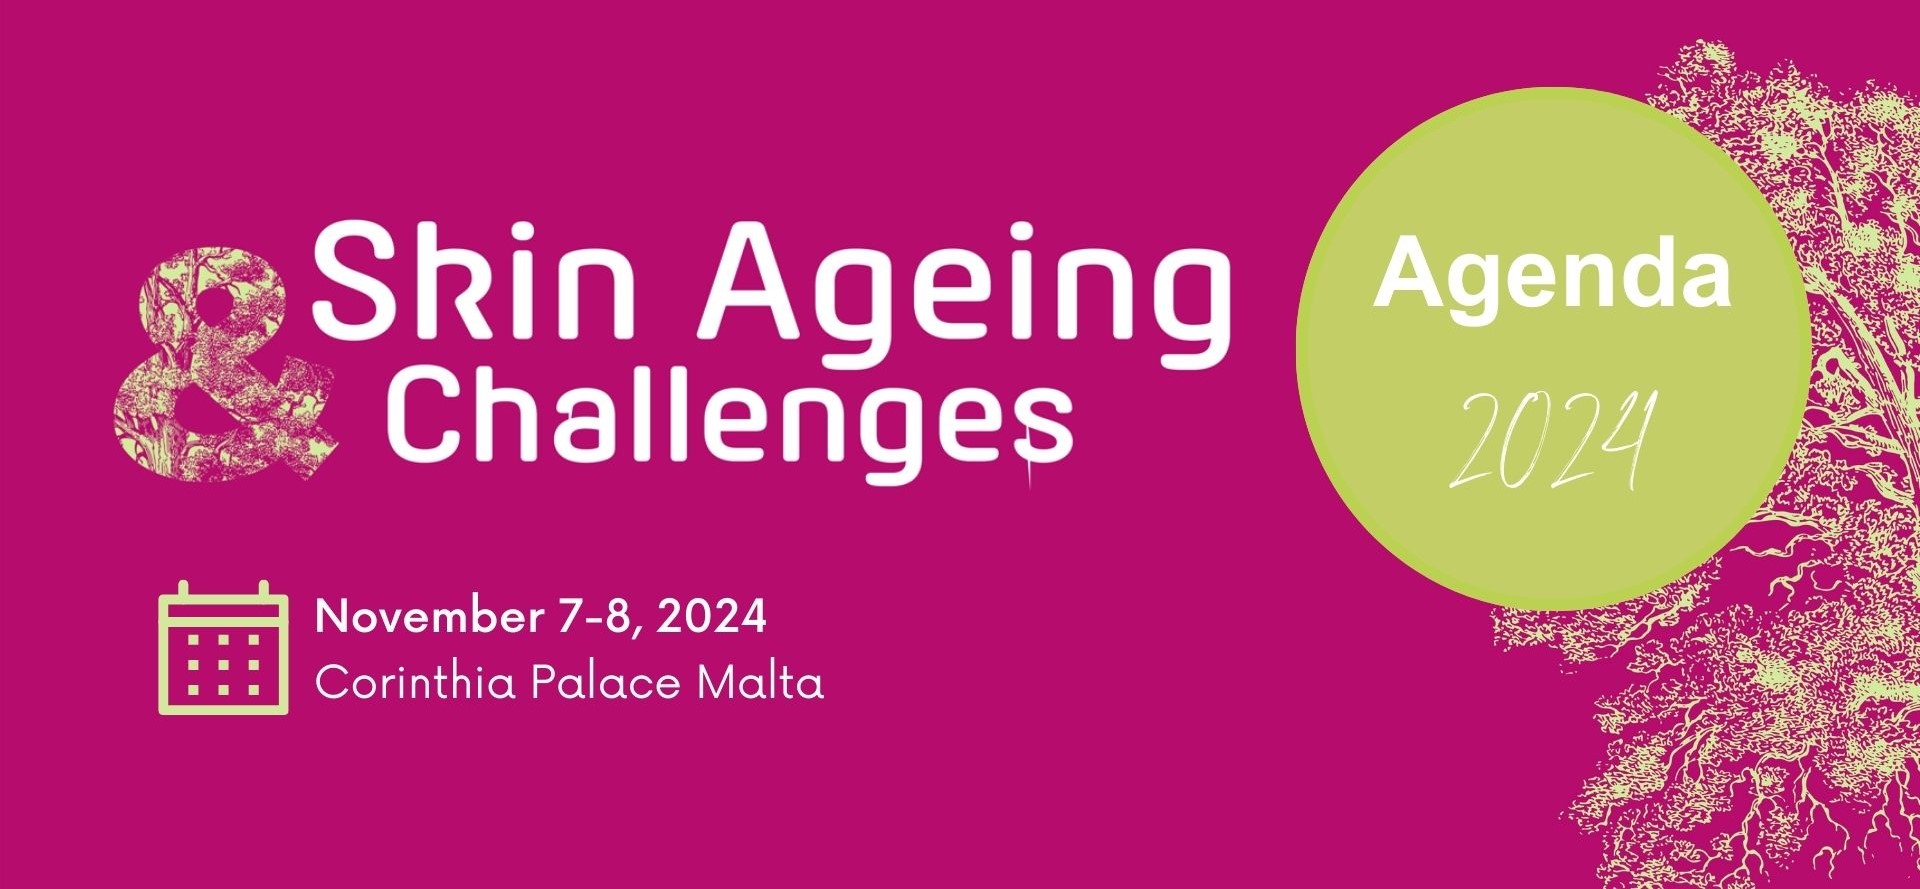 15th Edition: Skin Aging & Challenges 2024 Conference